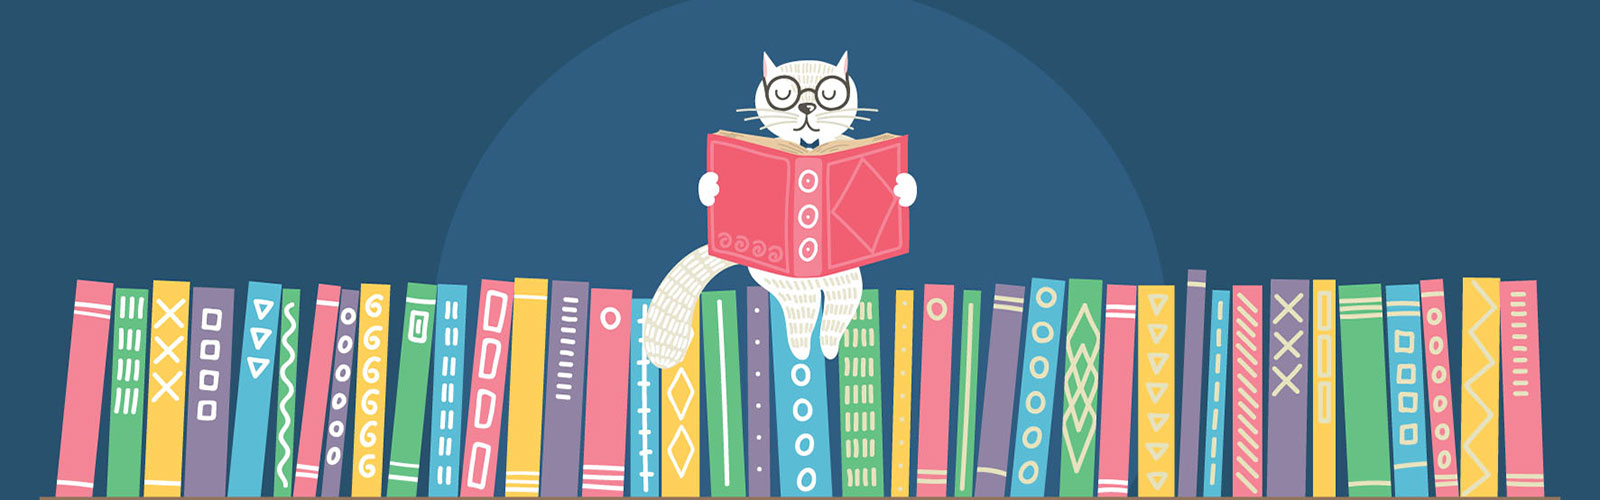 Cat reading on a stack of books